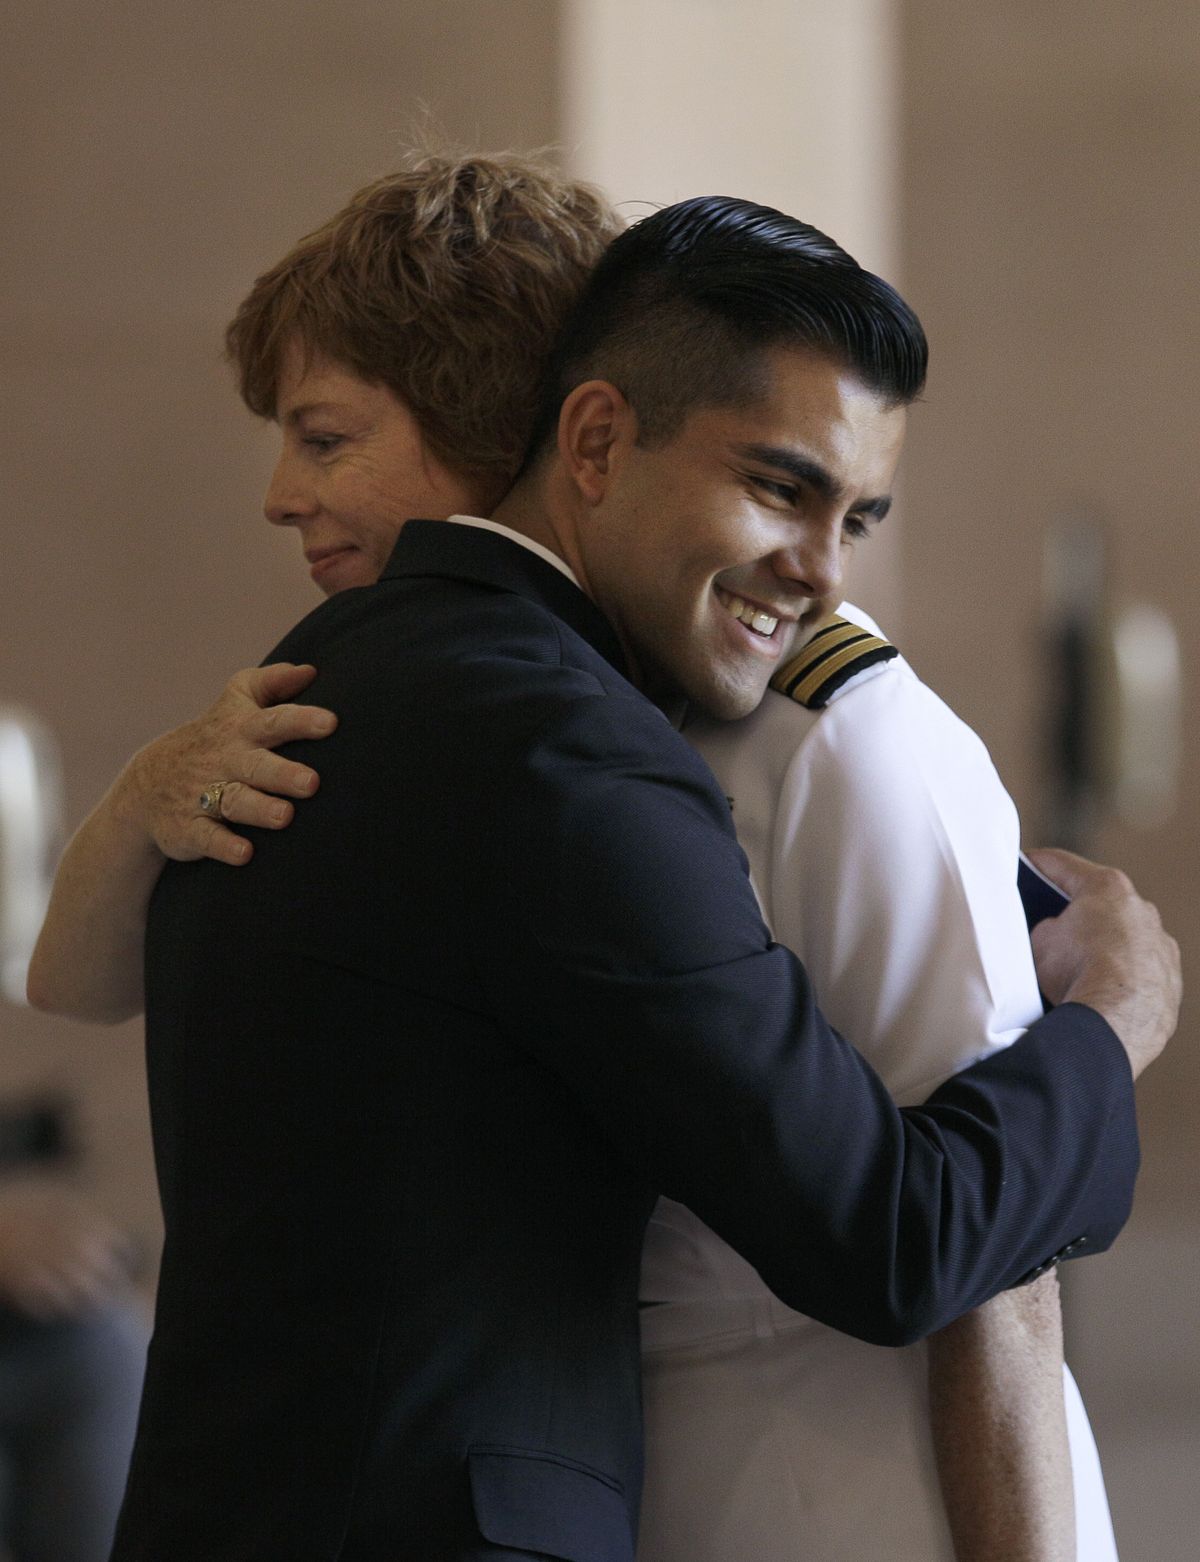 Retired U.S. Navy Petty Officer Joseph Rocha, foreground, hugs retired Navy Cmdr. Zoe Dunning before a news conference in San Francisco on Tuesday. (Associated Press)